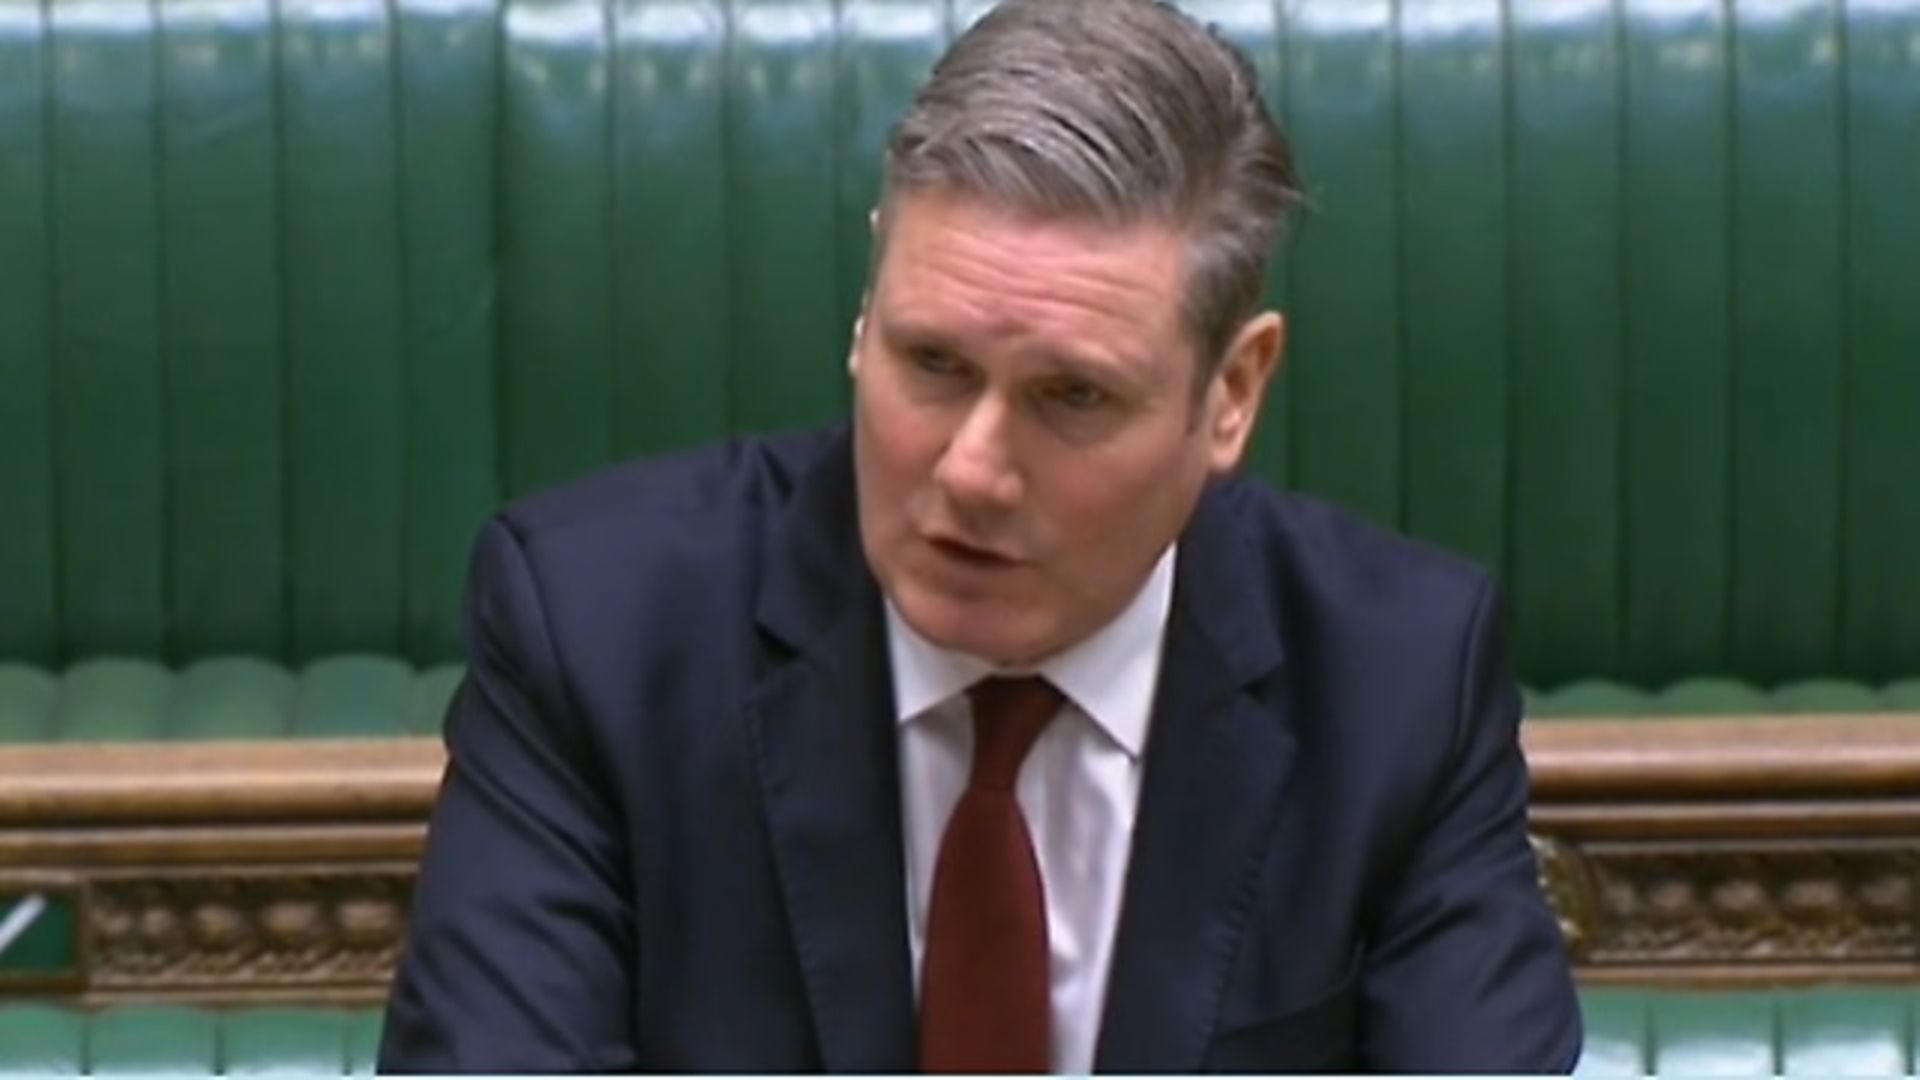 Leader Sir Keir Starmer is one of six Labour MPs who have tabled an Opposition Day debate motion to protect employment rights which are under threat post-Brexit. - Credit: Parliament Live